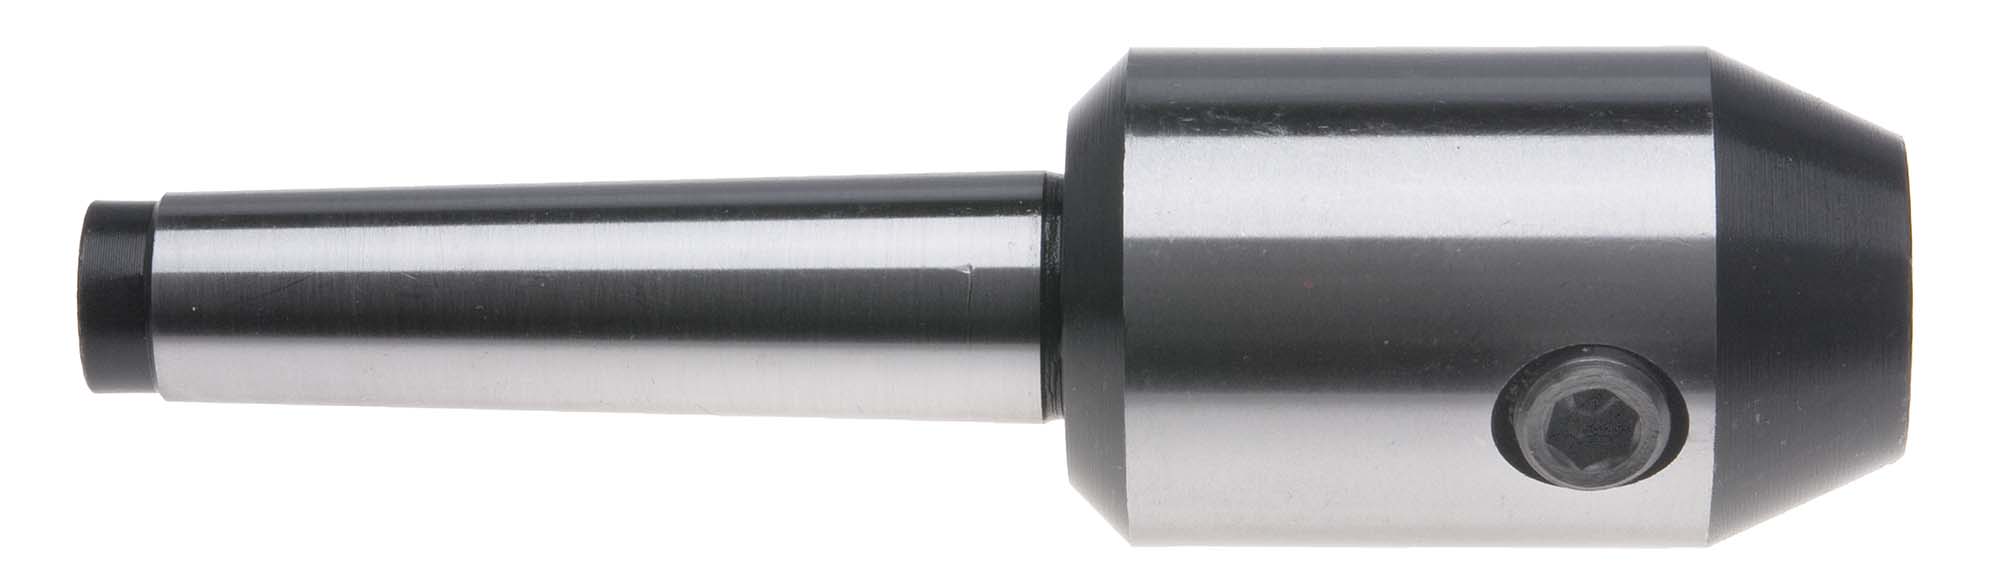 2 MT-3/8 End Mill Adapter with Drawbar End